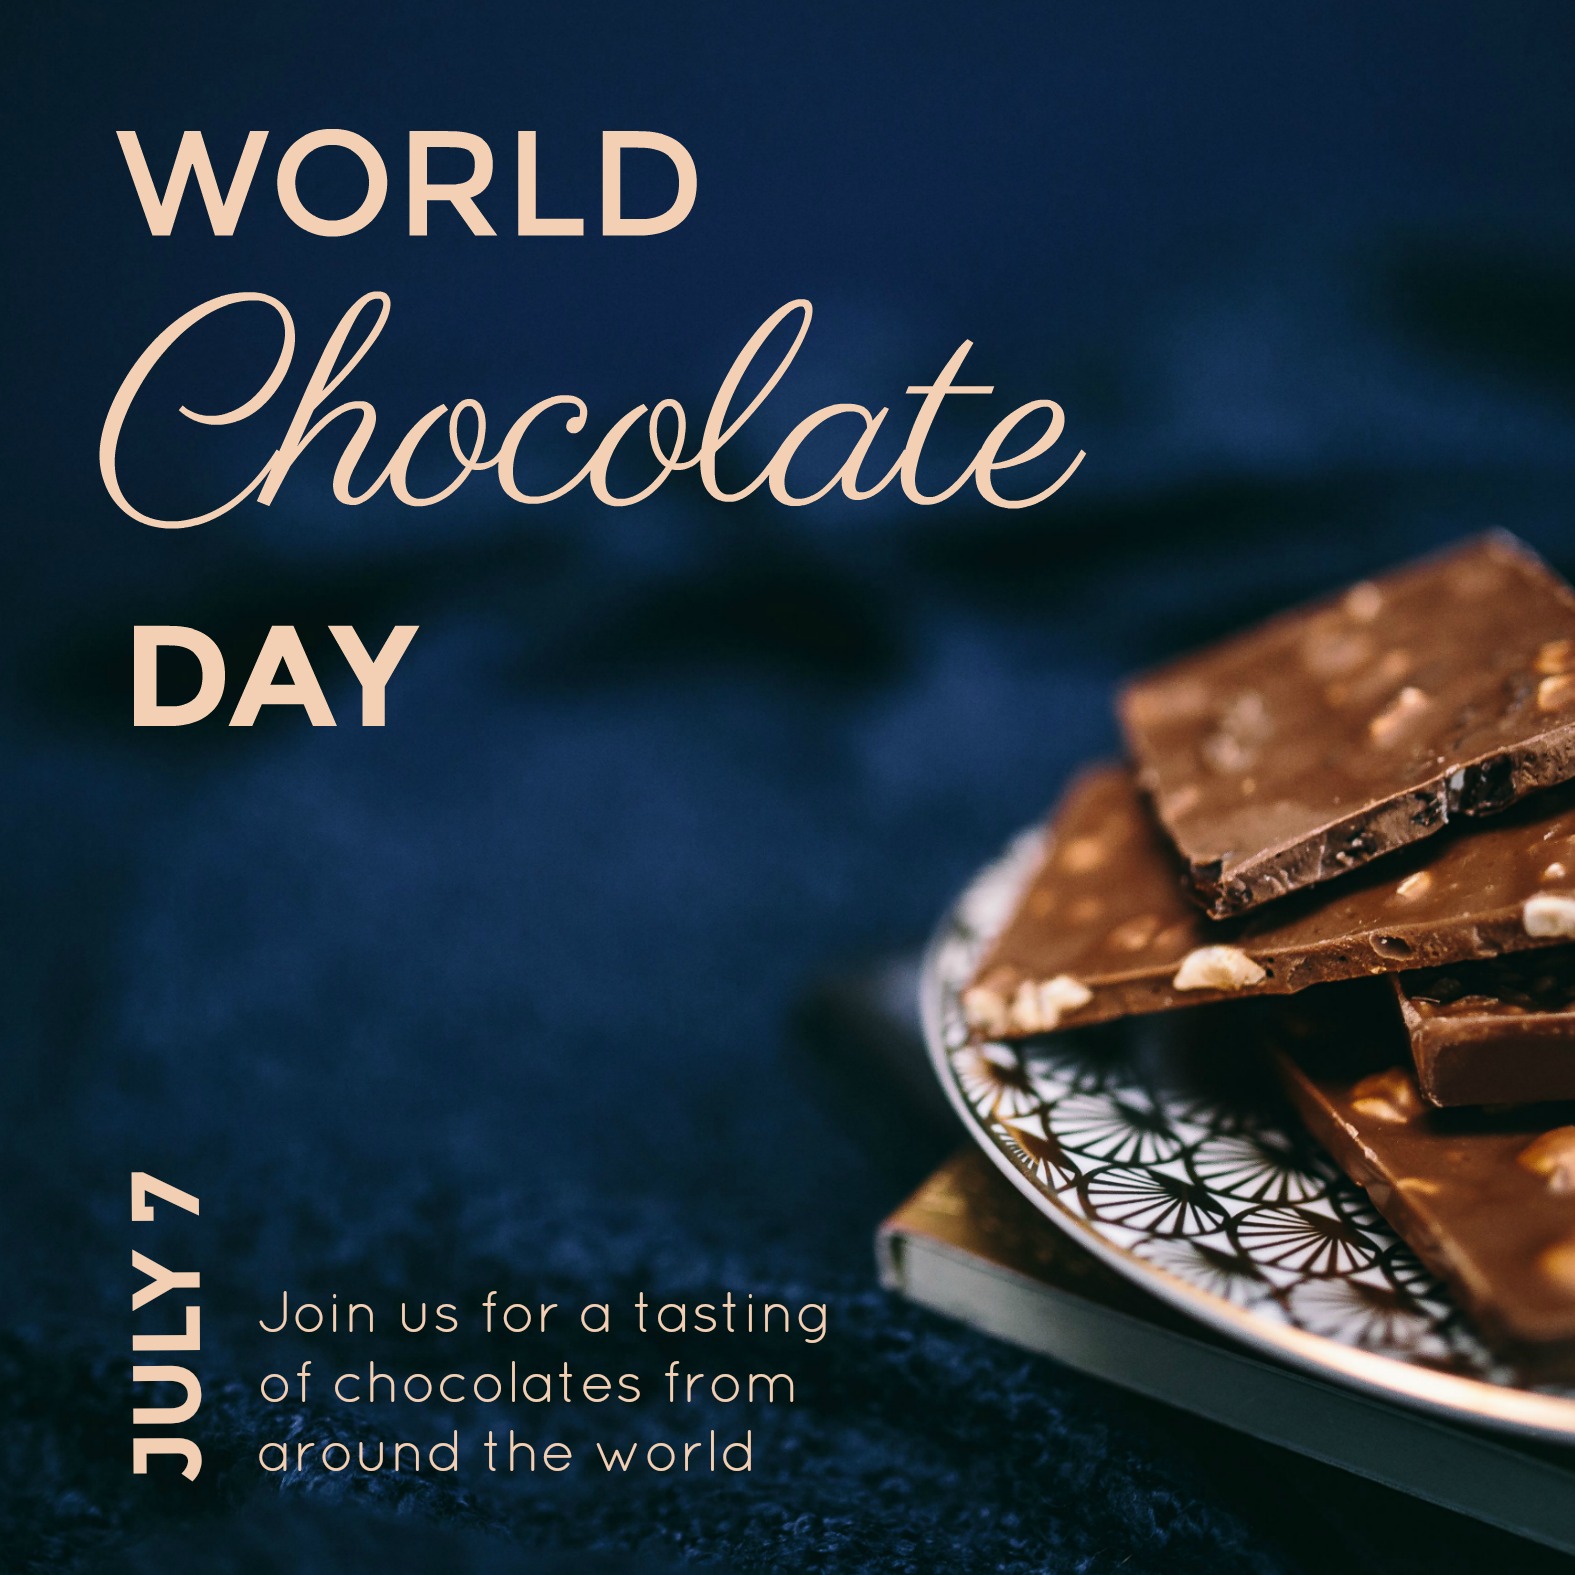 World Chocolate Day july 7 join us for a tasting of chocolates from around the world